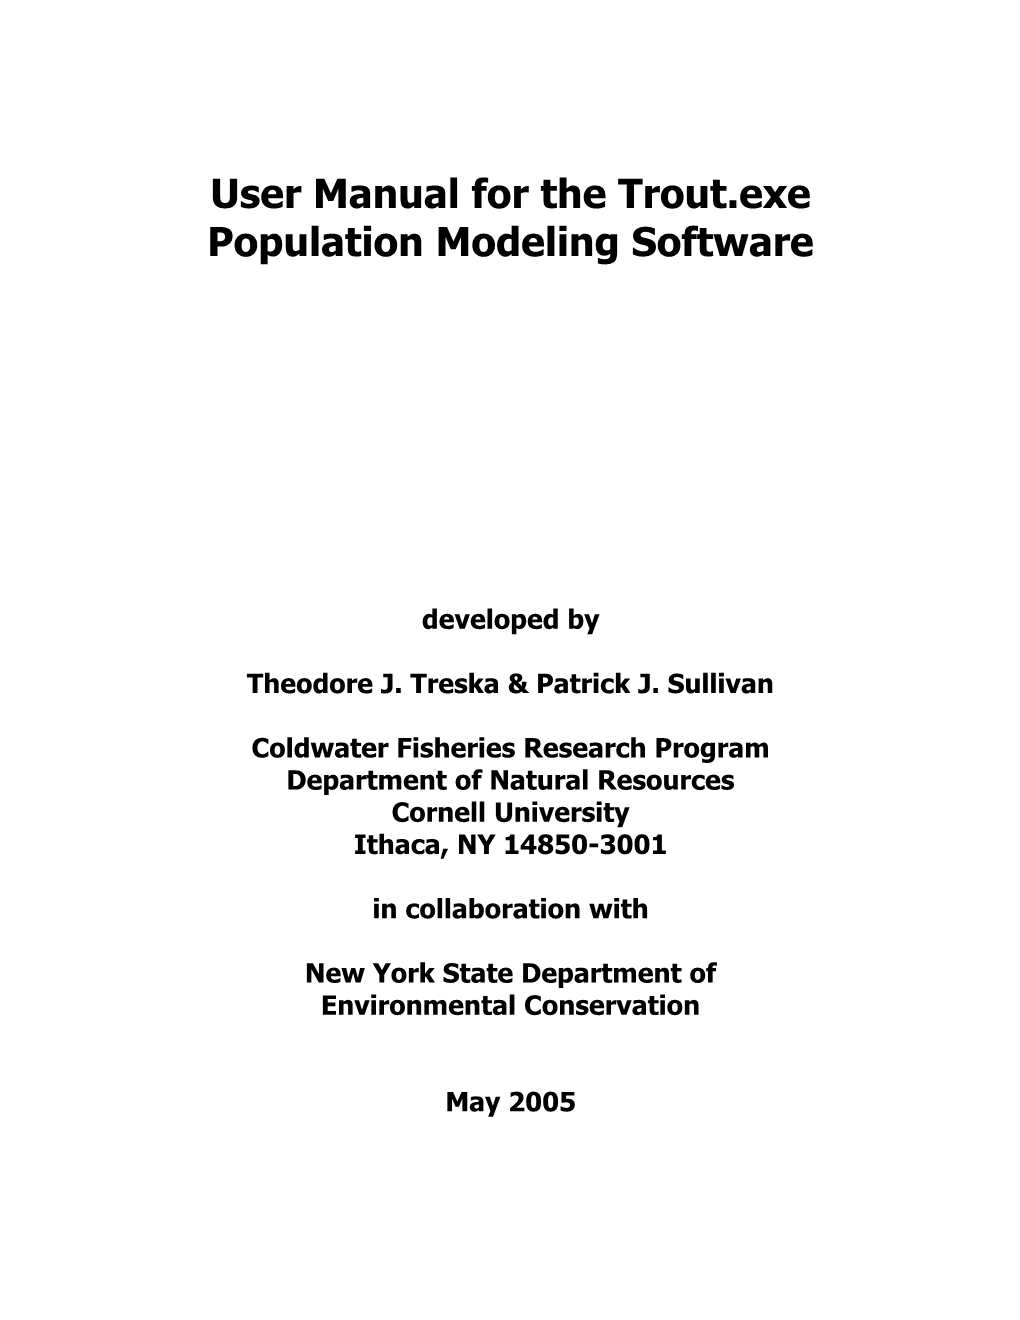 Users Manual Outline